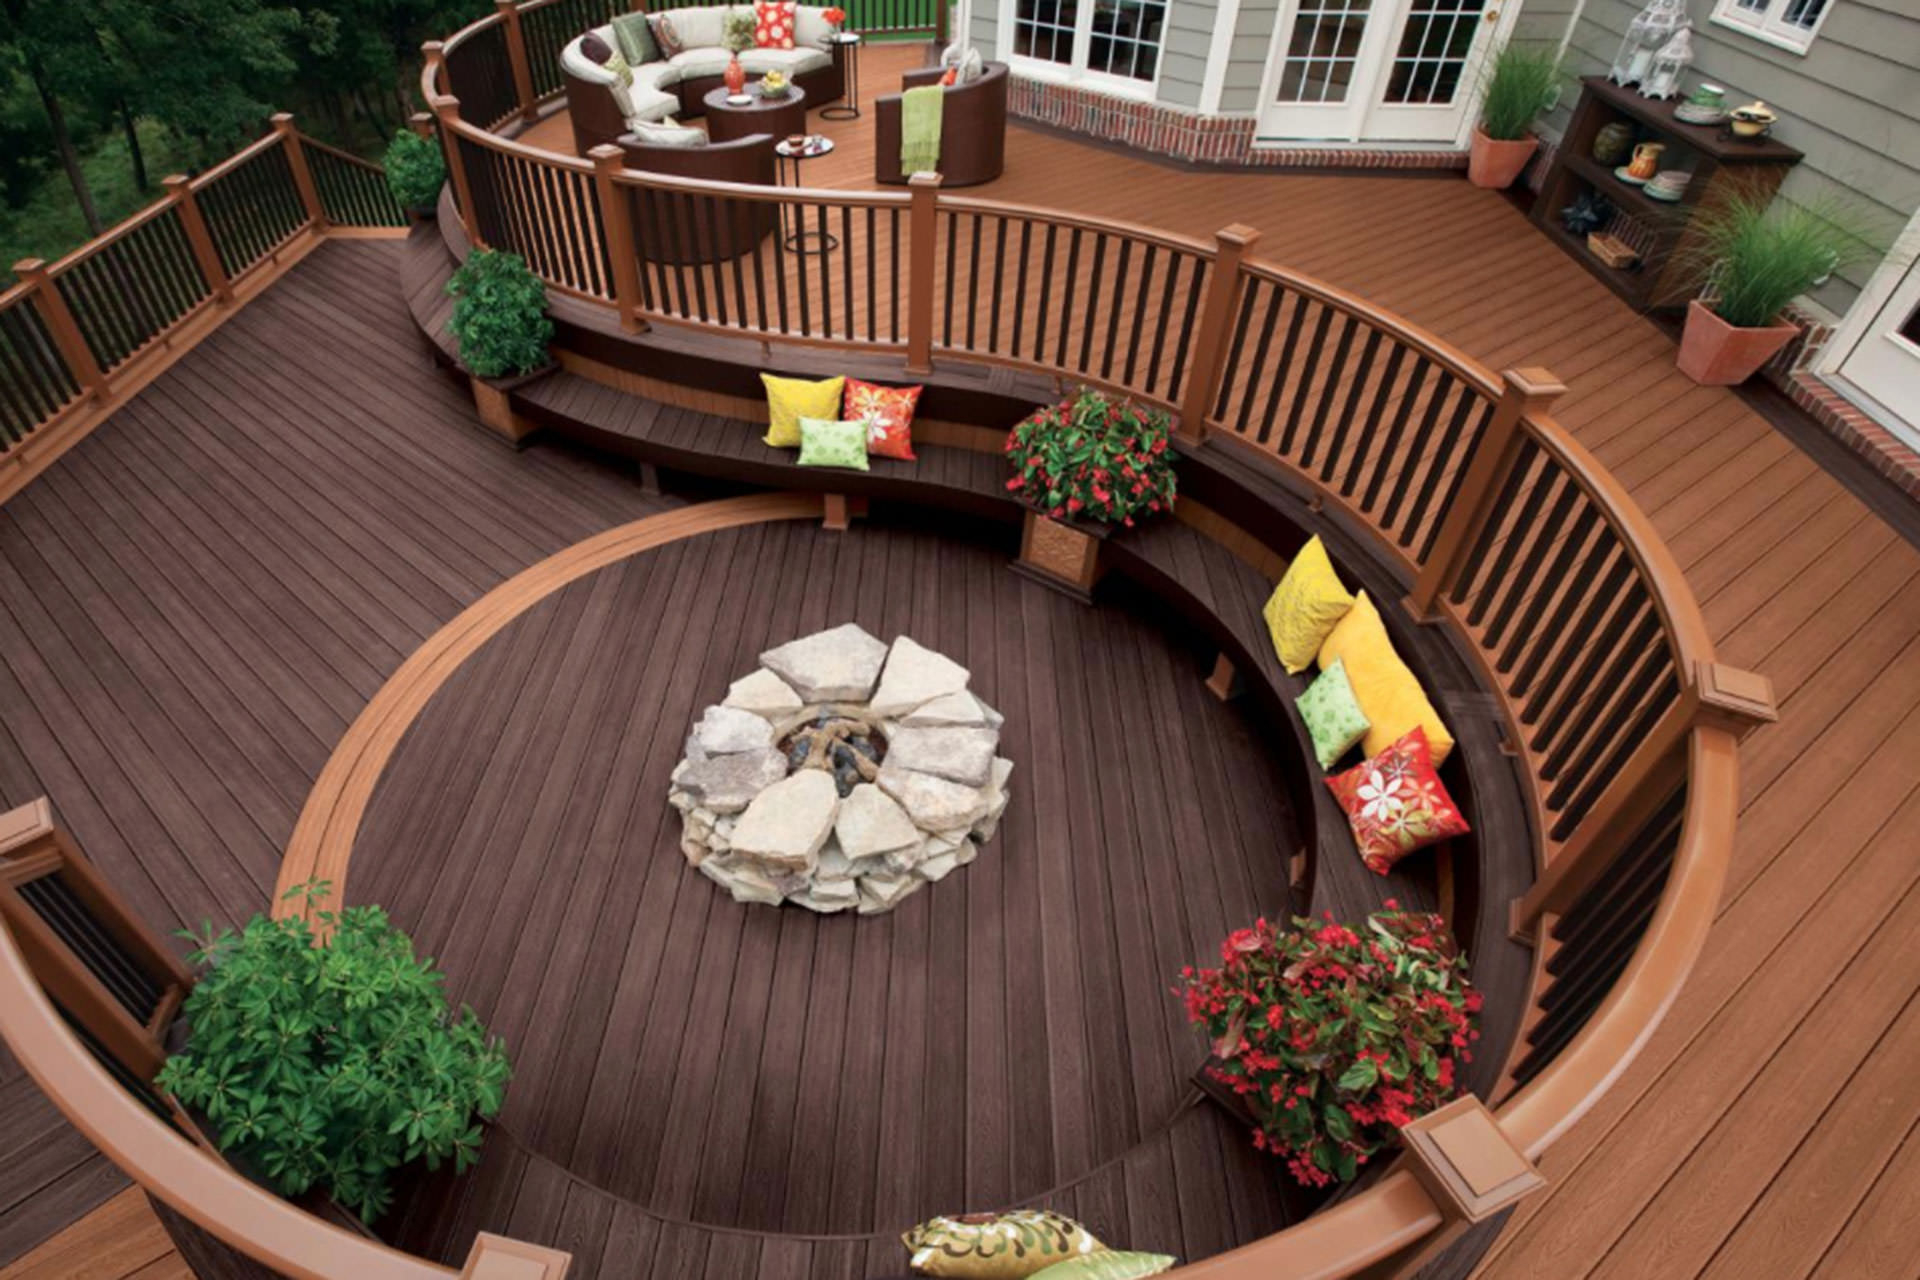 Wood Composite Or Pvc A Guide To Choosing Deck Materials throughout sizing 1920 X 1280